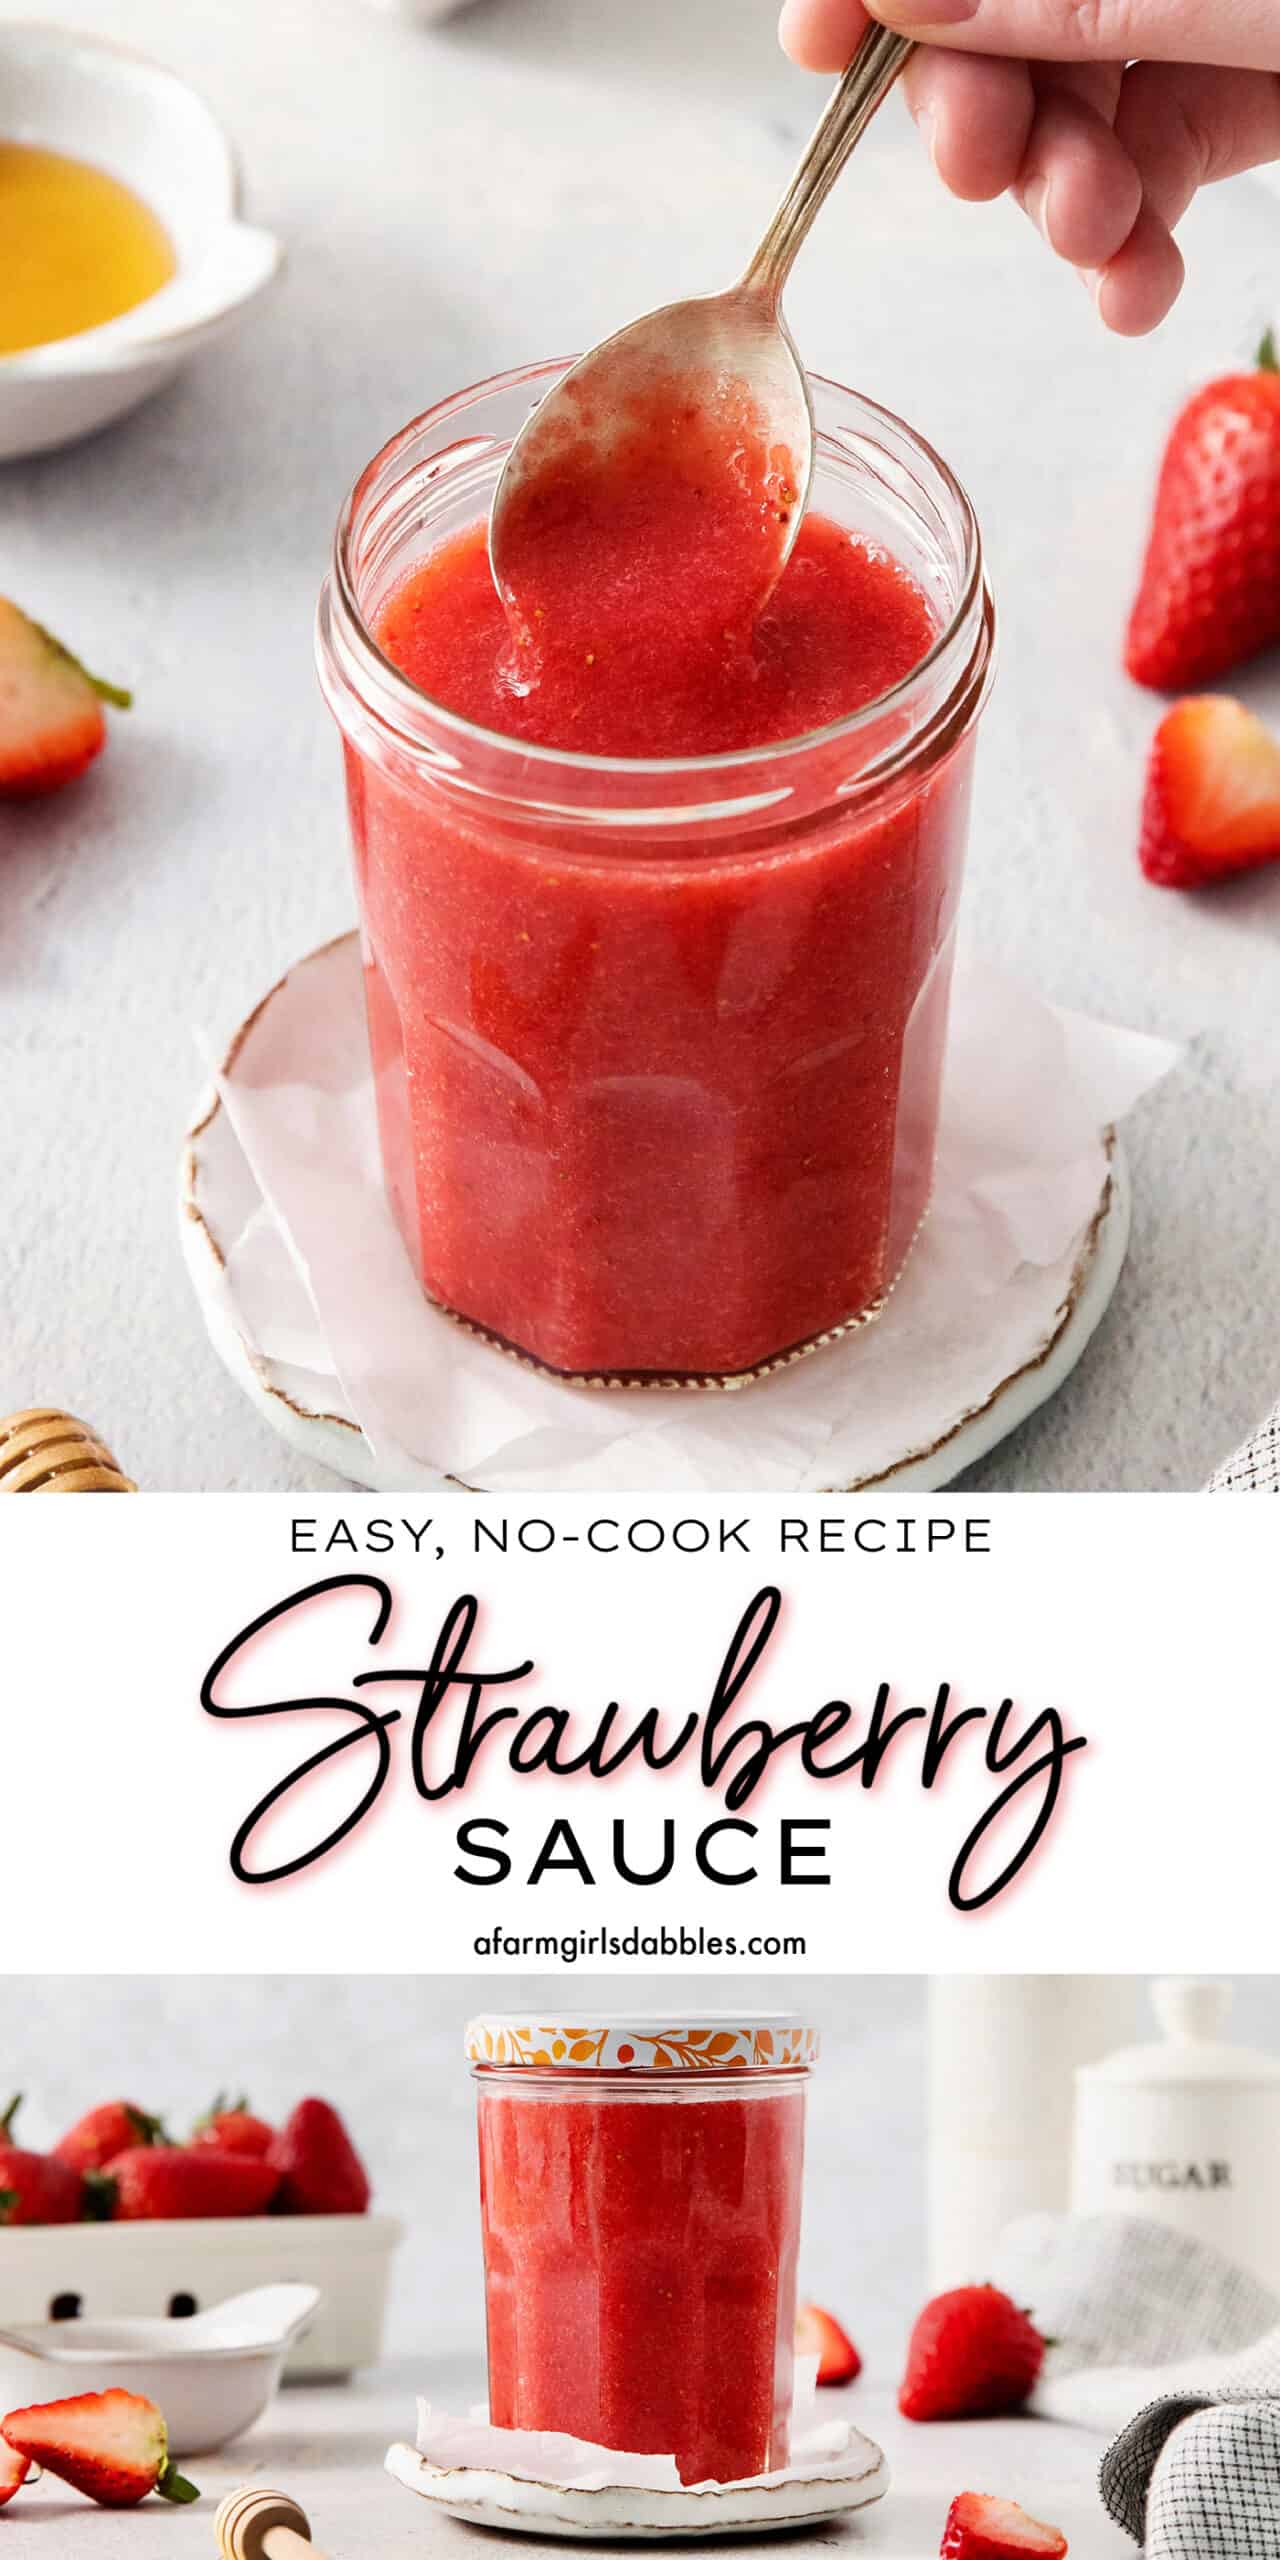 Pinterest image for strawberry sauce